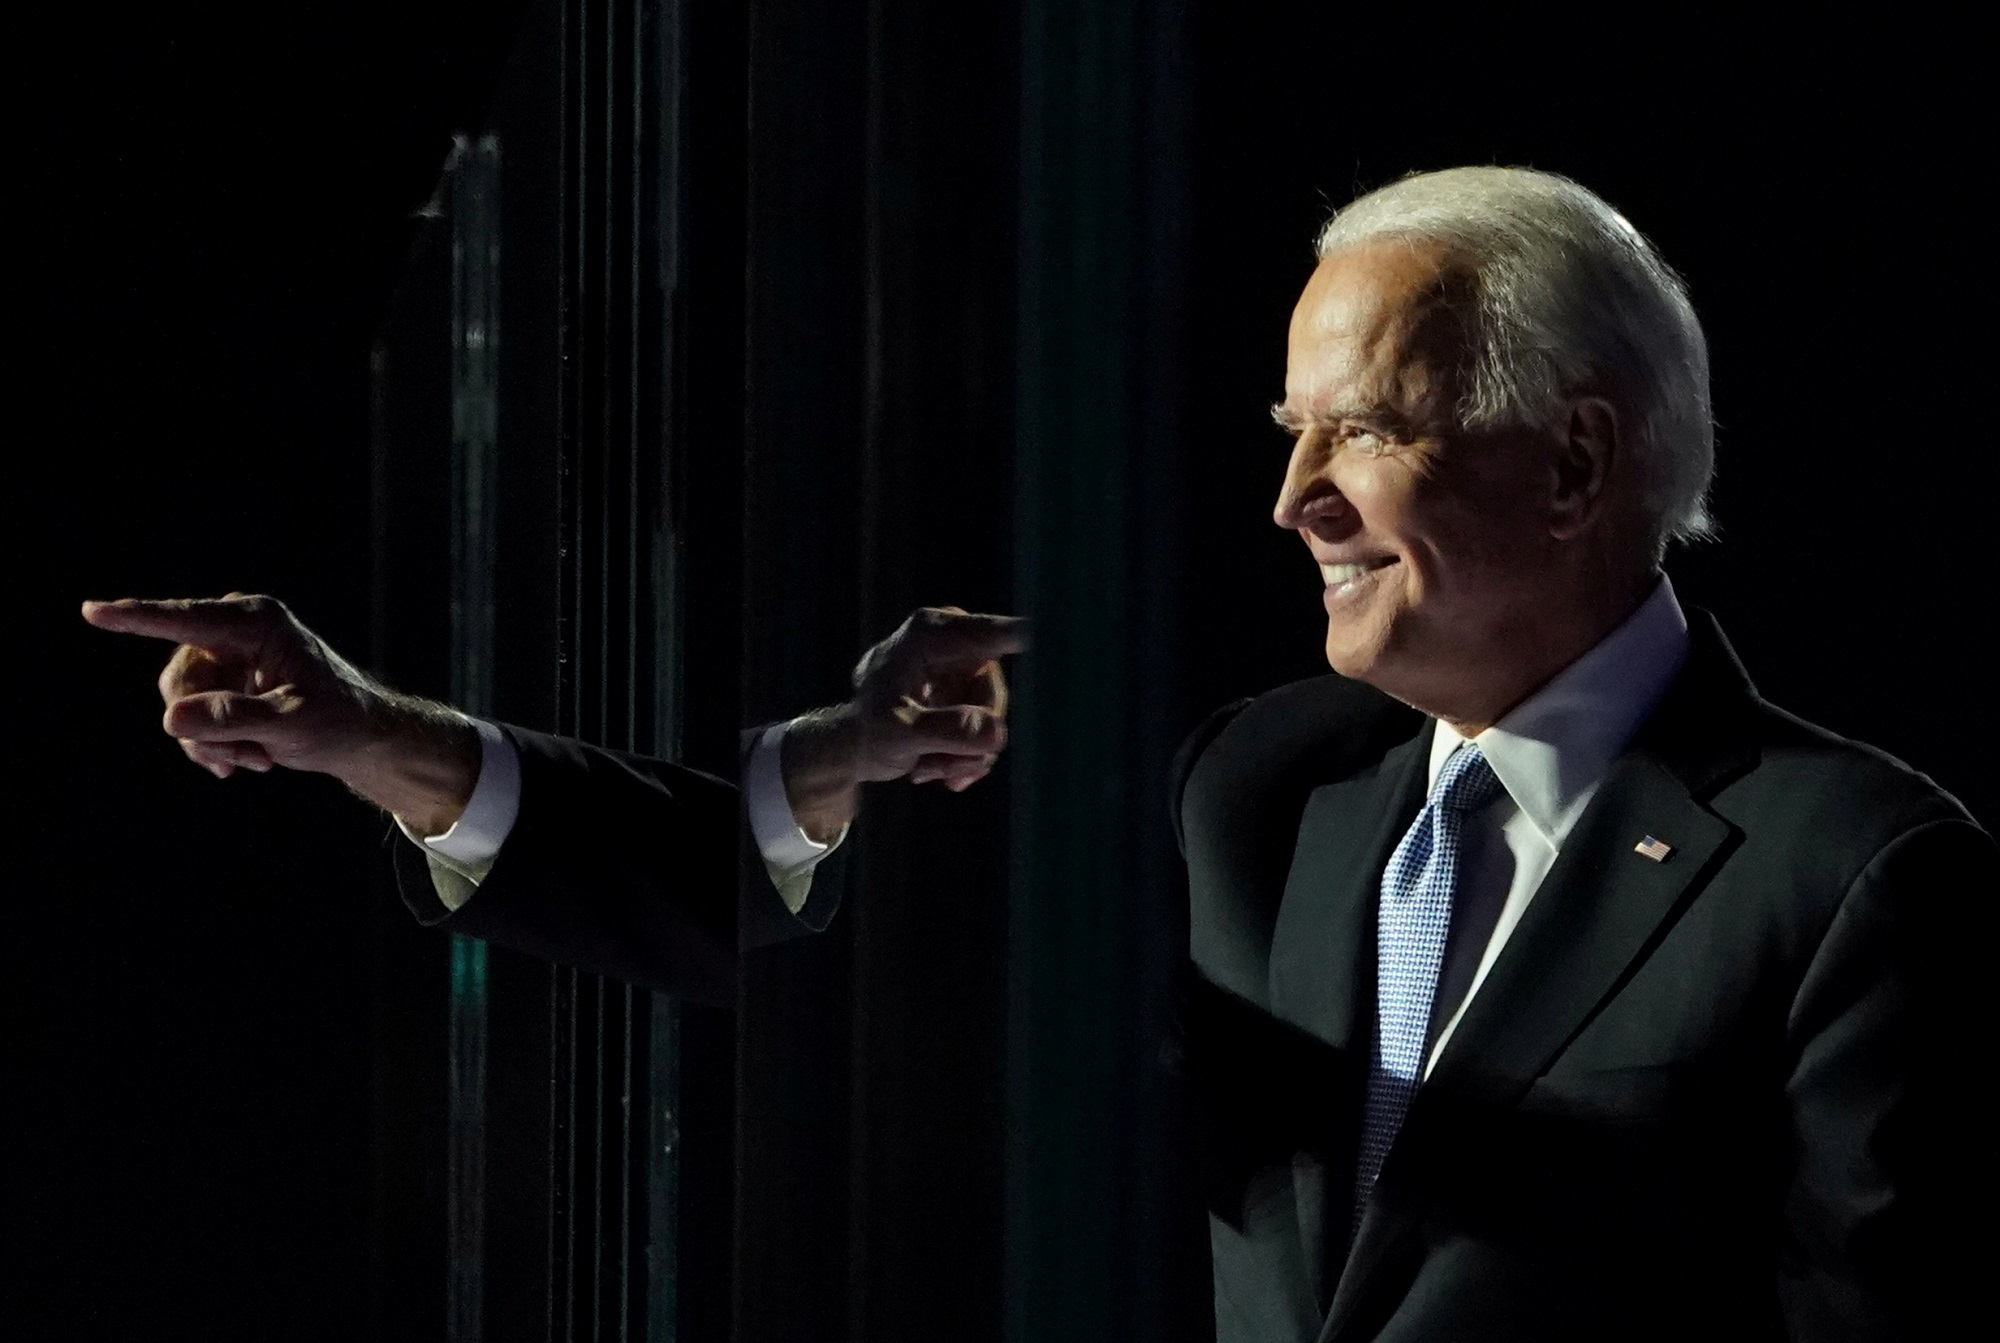 Democratic 2020 U.S. presidential nominee Joe Biden points a finger at his election rally, after news media announced that Biden has won the 2020 U.S. presidential election, in Wilmington, Delaware